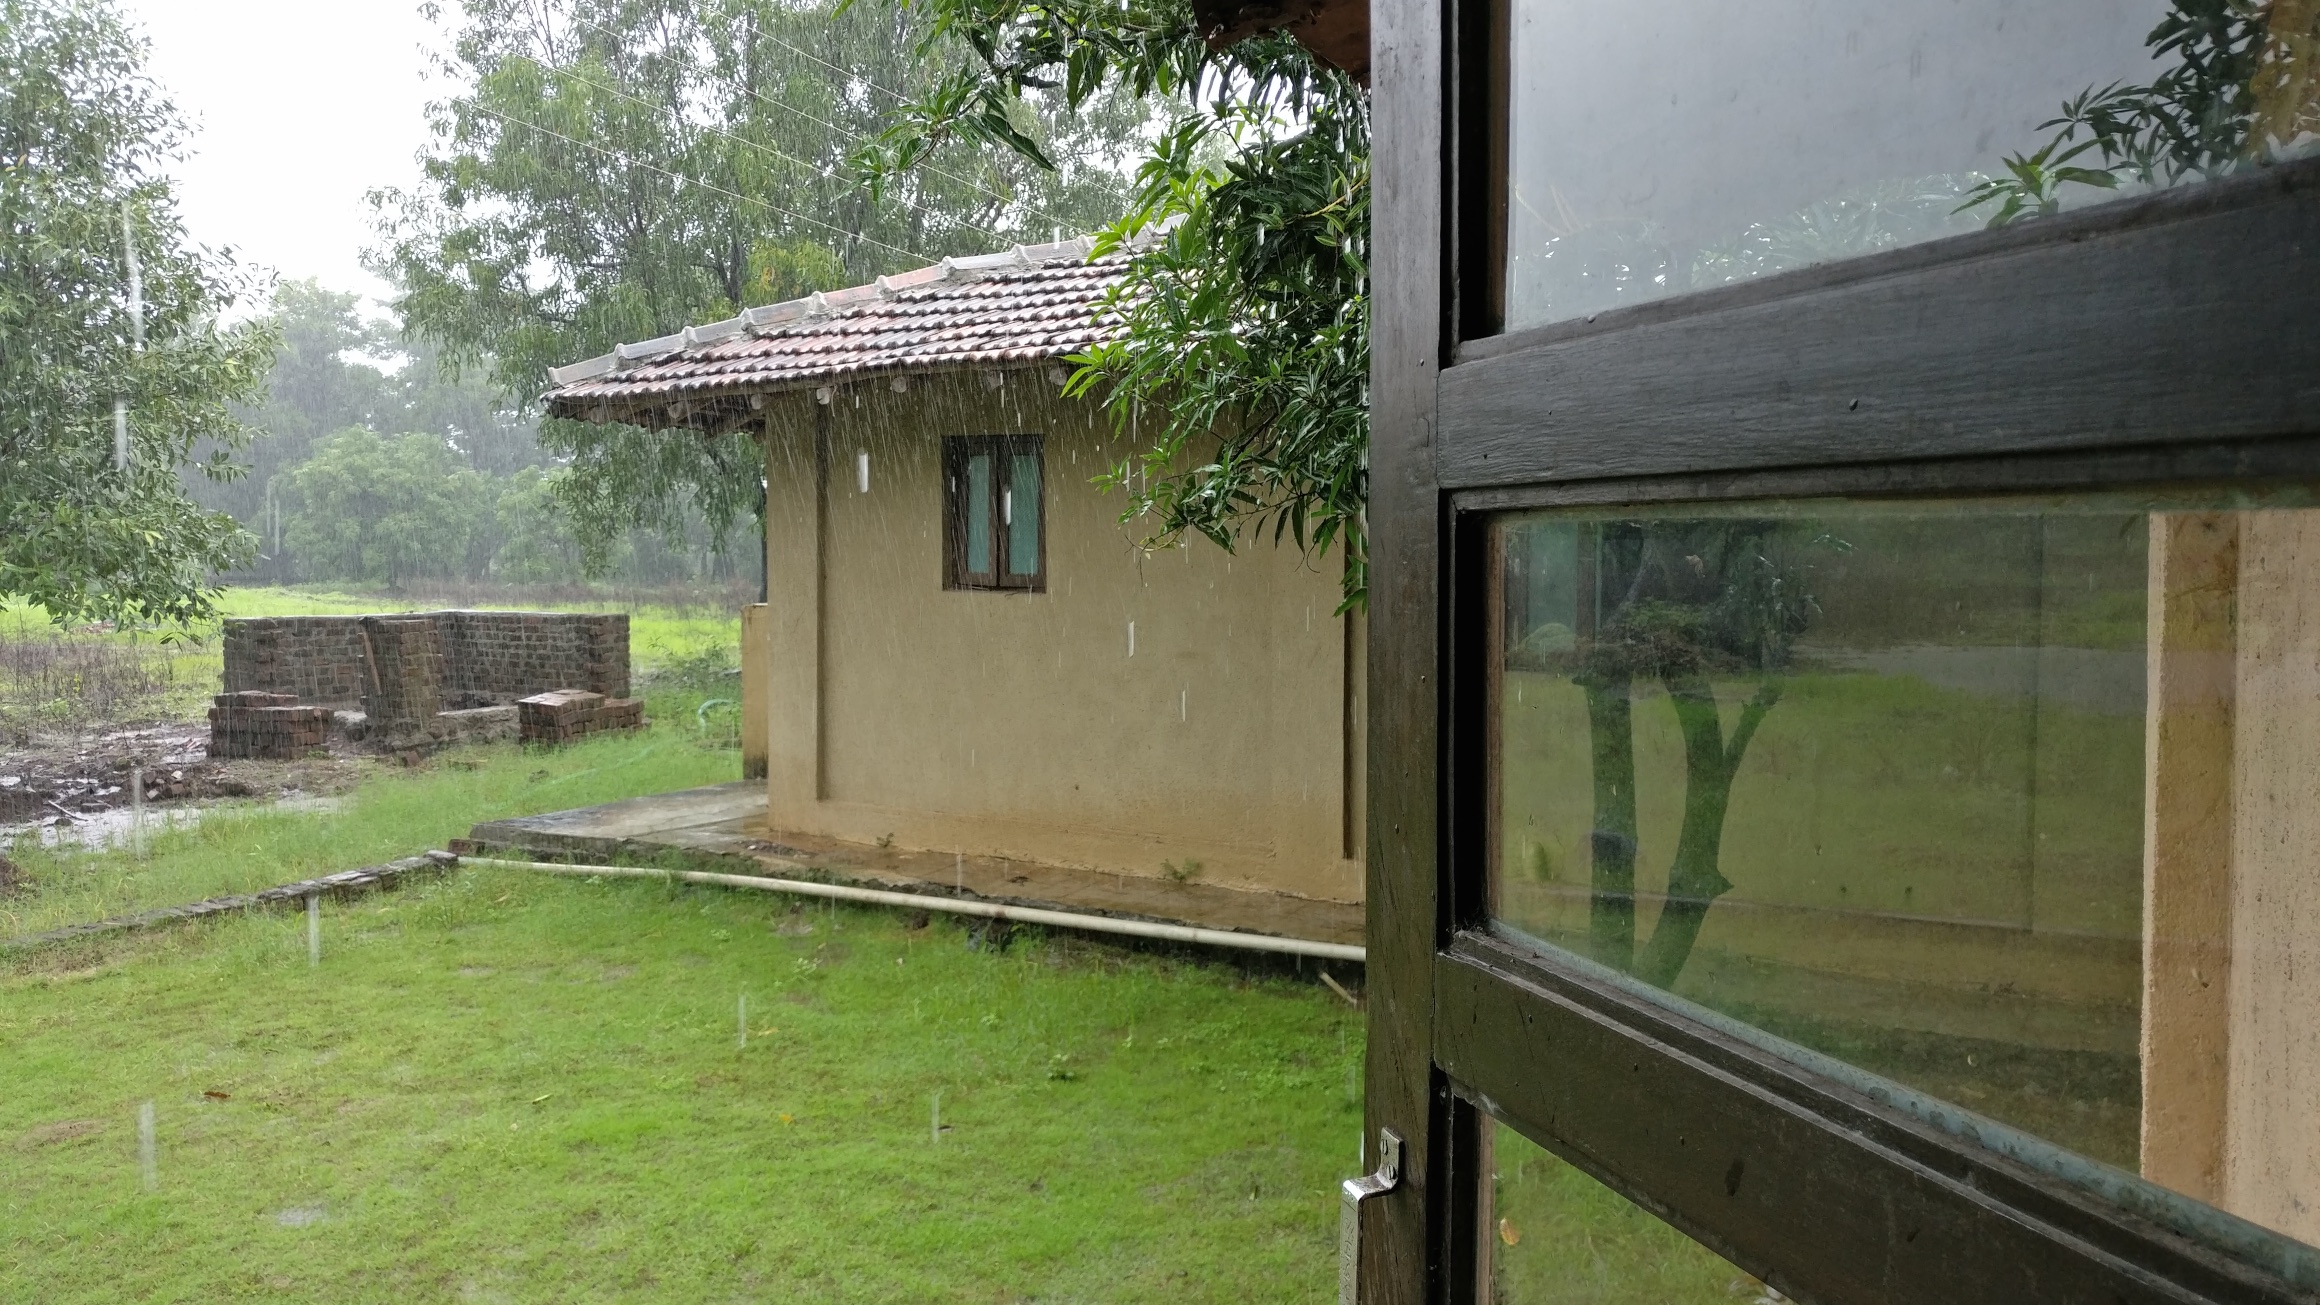 If you believe that sometimes simple is the new beautiful, than you must visit Mango Huts at Pali, Khopoli near Imagica